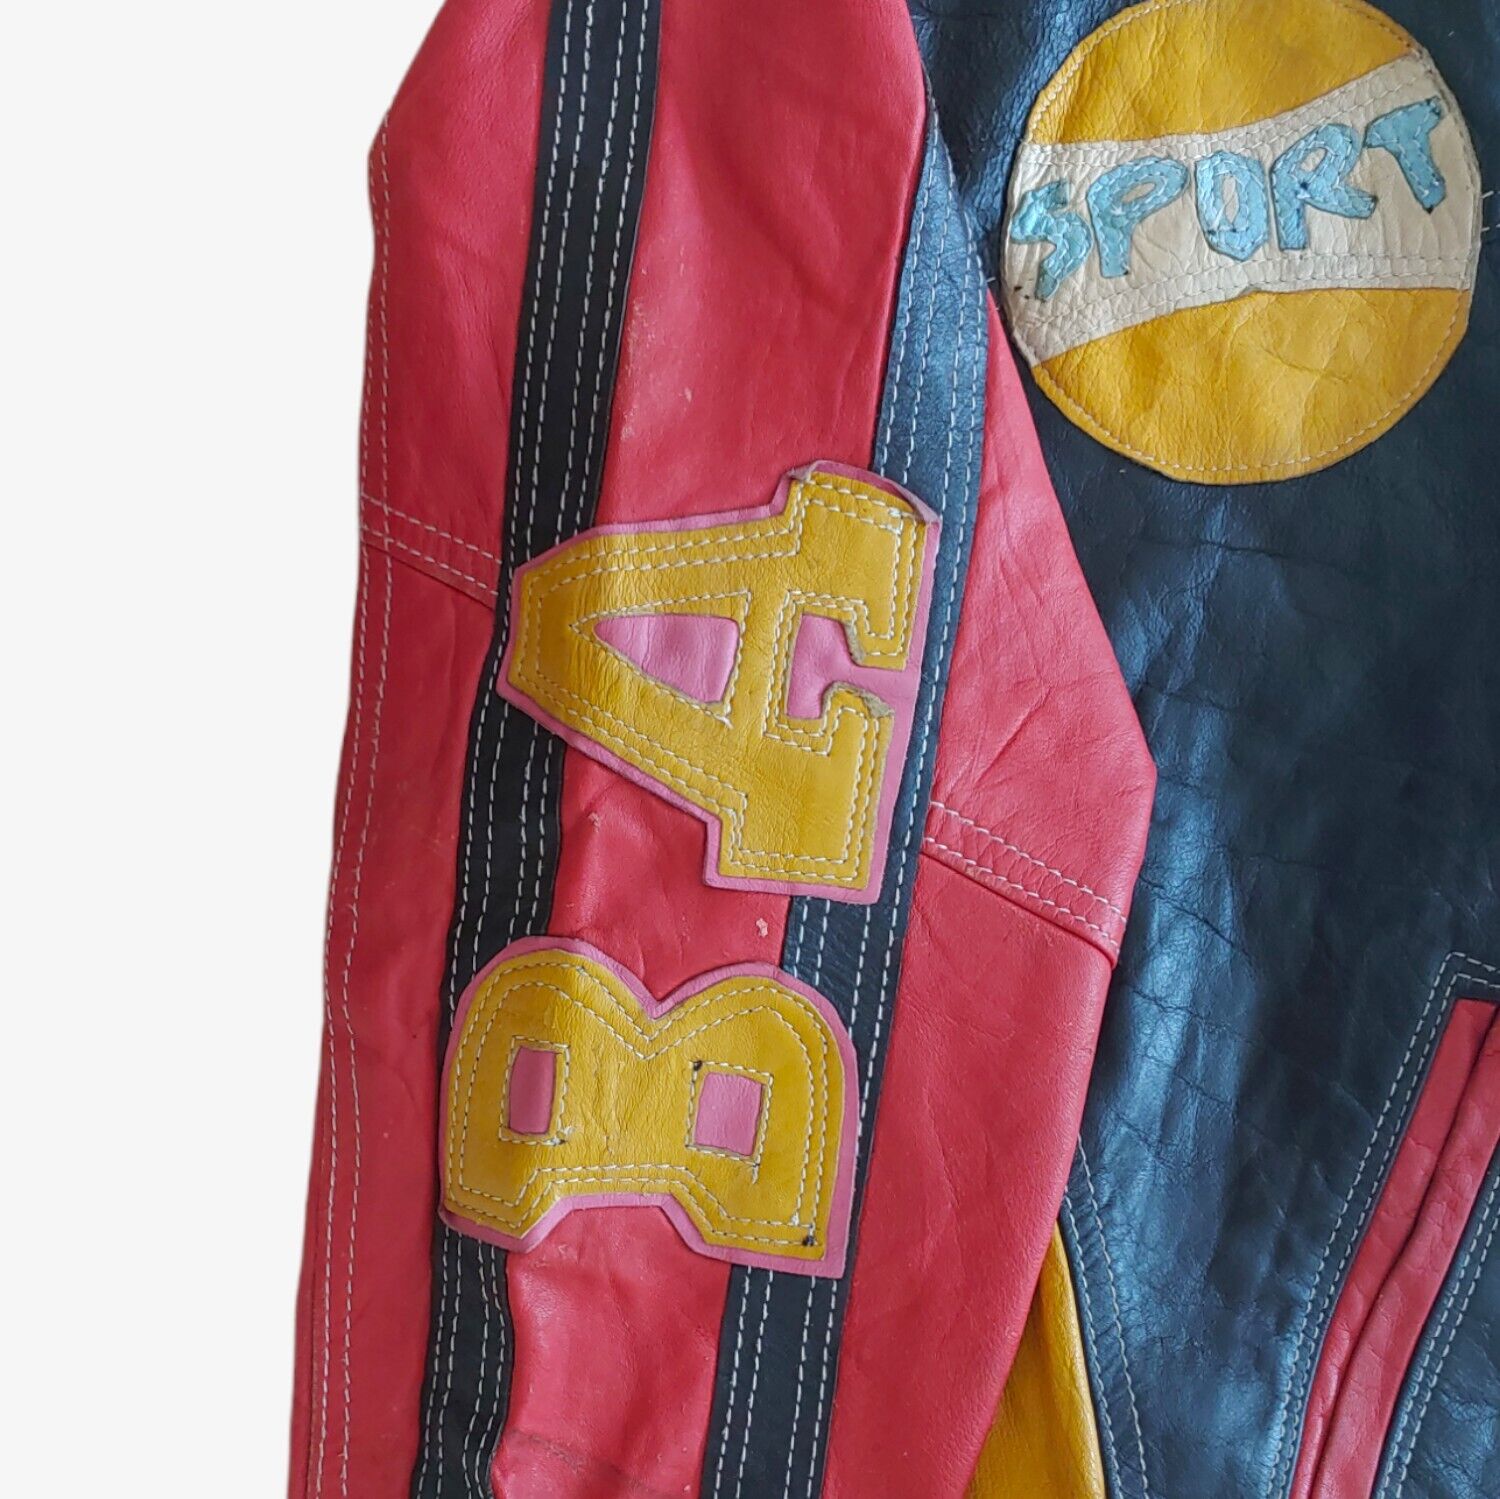 Vintage 90s Baseball Embroidered Spell Out Colourful Leather Varsity Jacket With Big Back Motif Left Arm - Casspios Dream